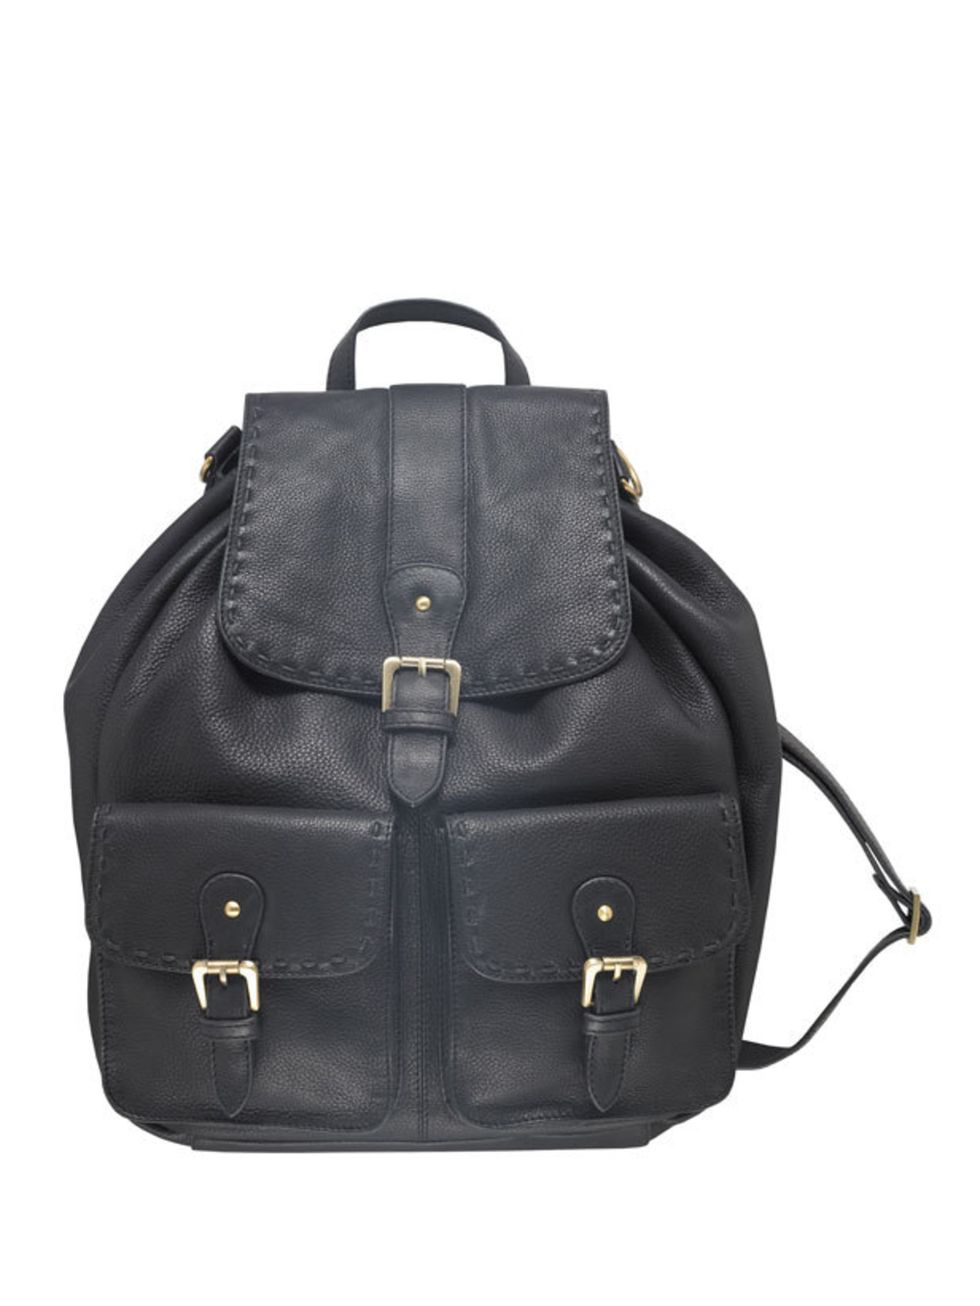 <p>Master cool-girl style whilst revving up your off-duty attire with this luxe leather rucksack <a href="http://www.lauraashley.com/bags+purses/black-leather-rucksack-bag/invt/bg017/">Laura Ashley</a> leather rucksack, £100</p>